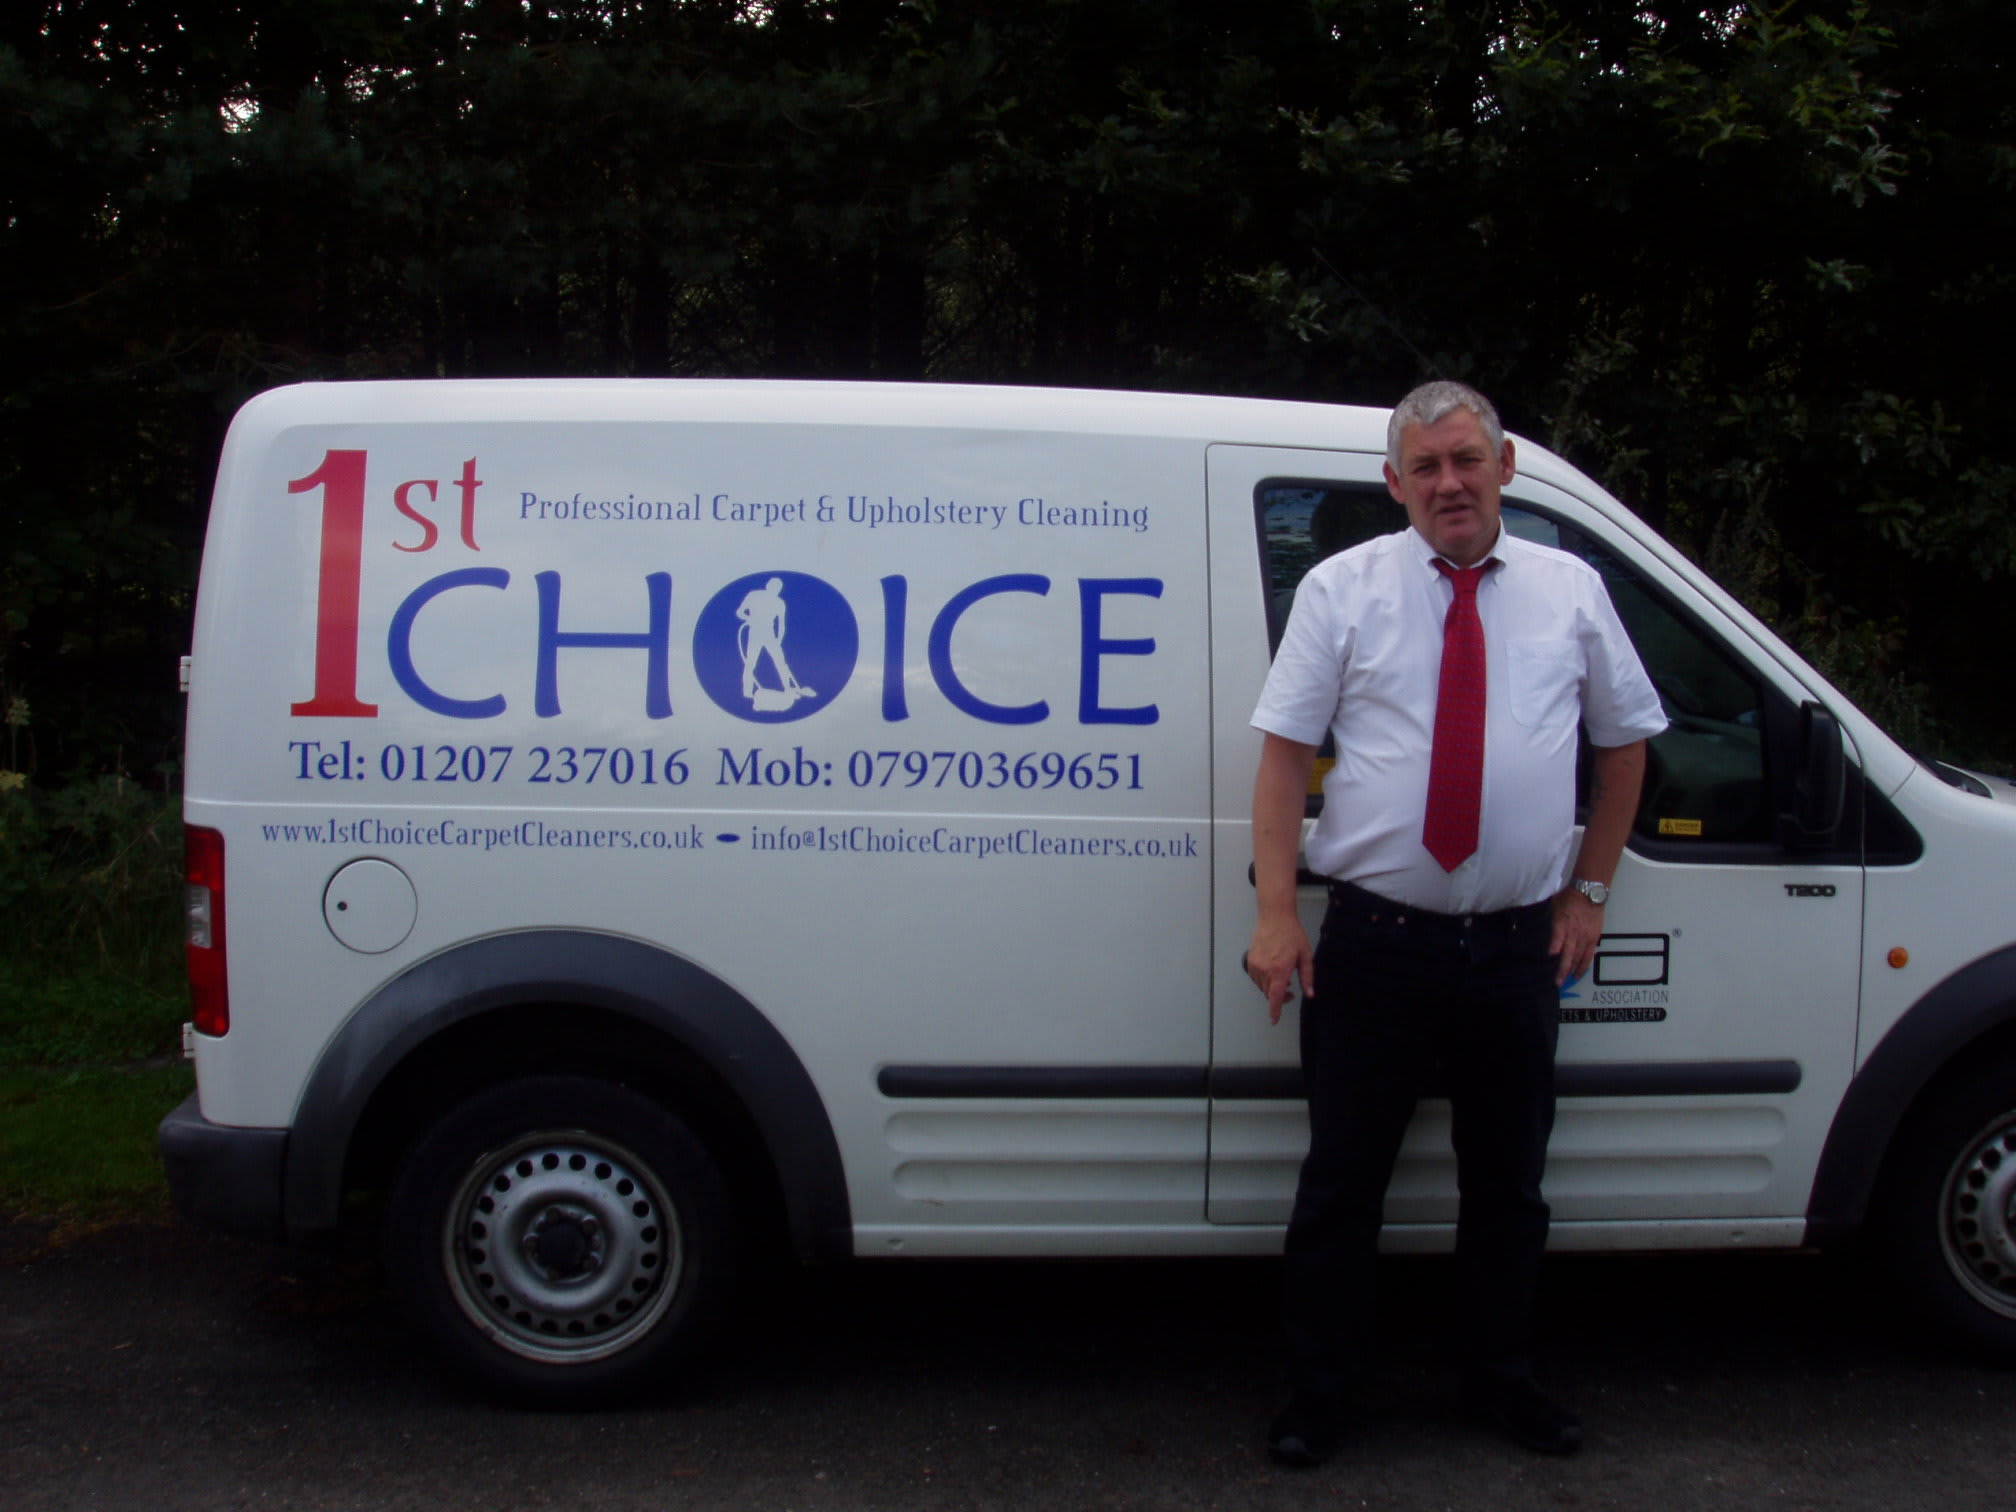 1st Choice Professional Carpet & Upholstery Cleaners | 19 Browning Close, Stanley DH9 6UE | +44 1207 237016